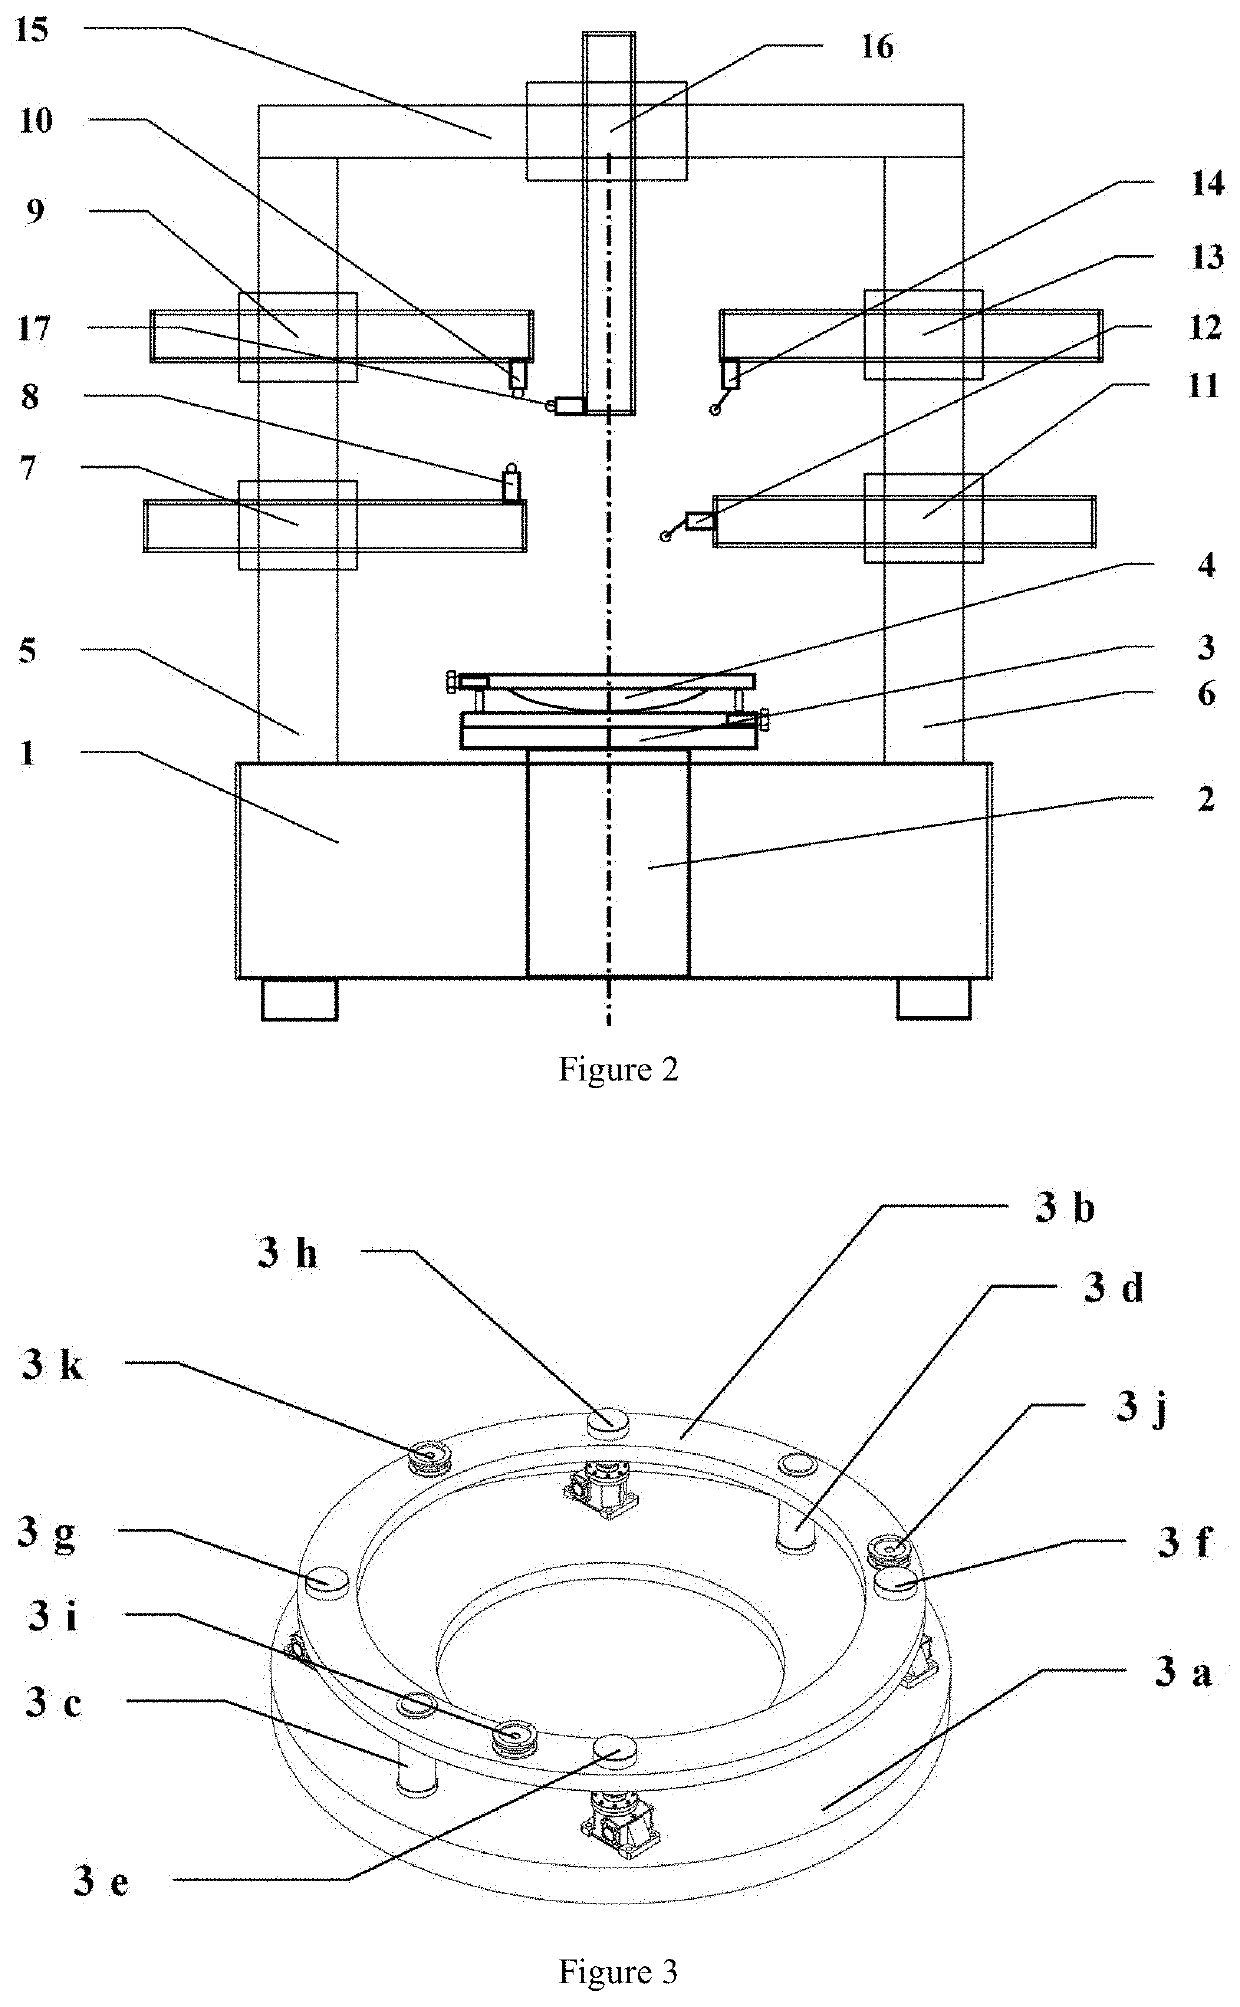 Deep learning regulation and control and assembly method and device for large-scale high-speed rotary equipment based on dynamic vibration response properties